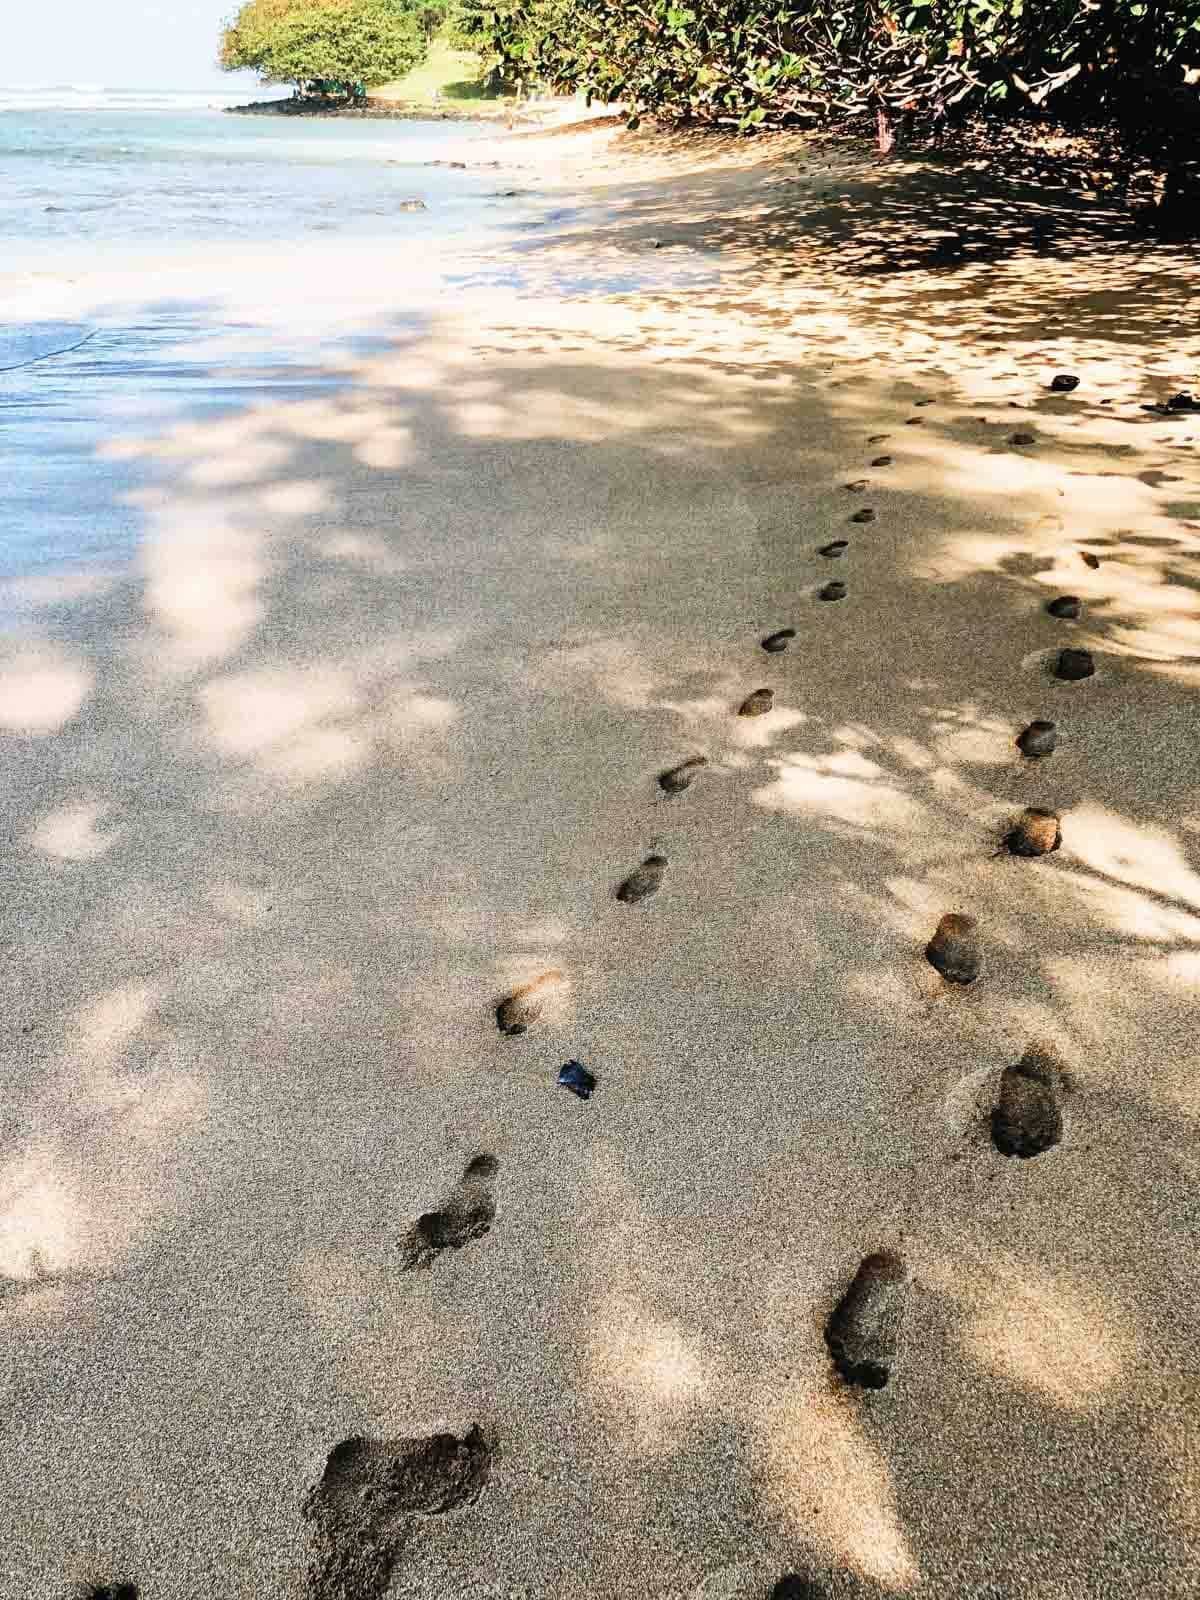 Footprints in the sand.